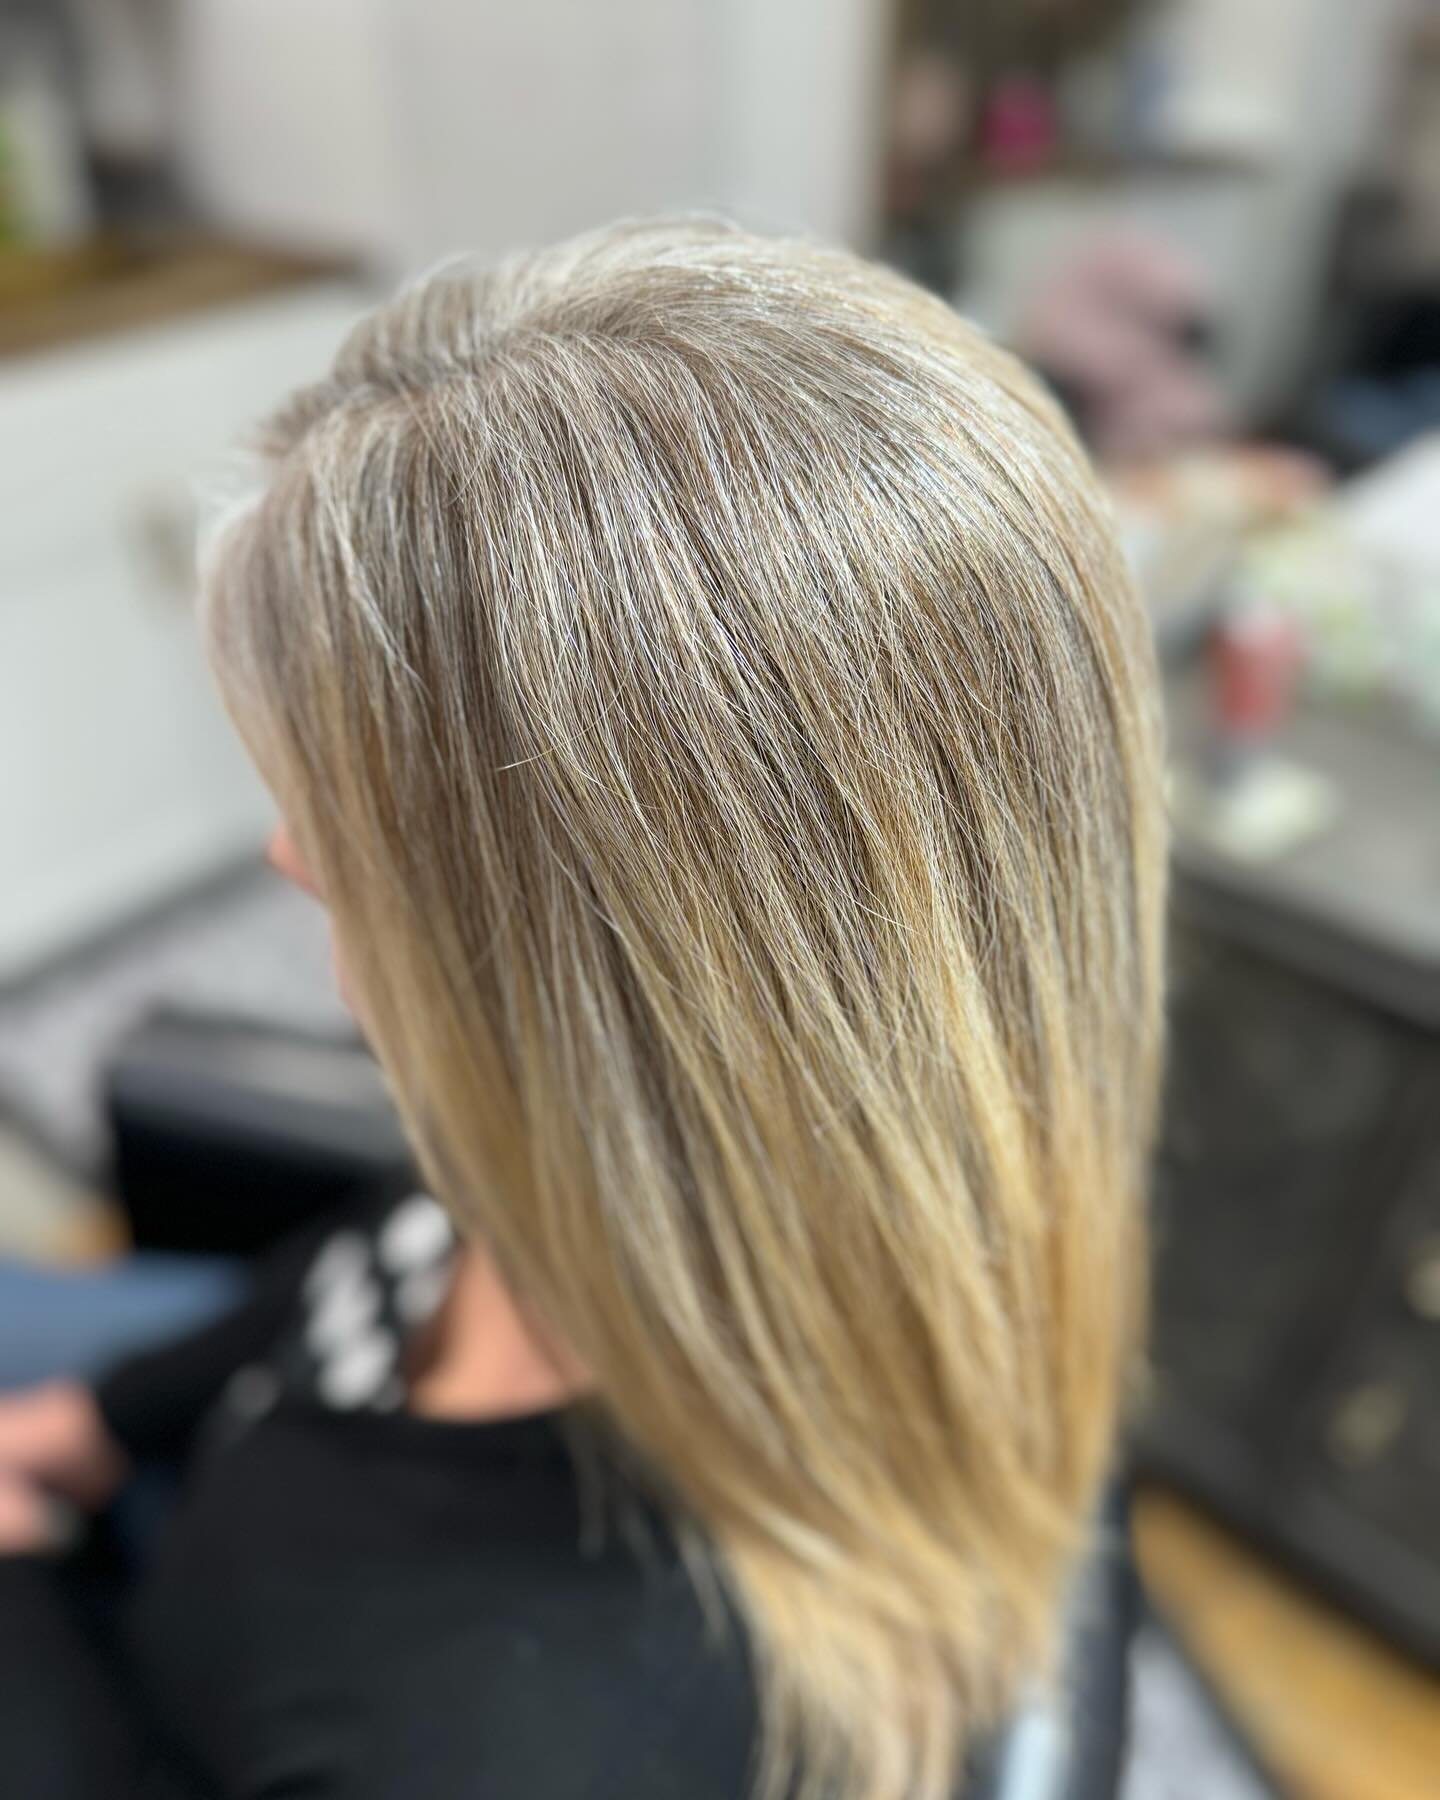 💫let it live💫

Are you tired of 4 week root maintenance? We can utilize your bio colour palette to create long lasting results. This friend went from 4 week root touch ups to 16 week strand lights. Allowing your natural colour a seat at the table g